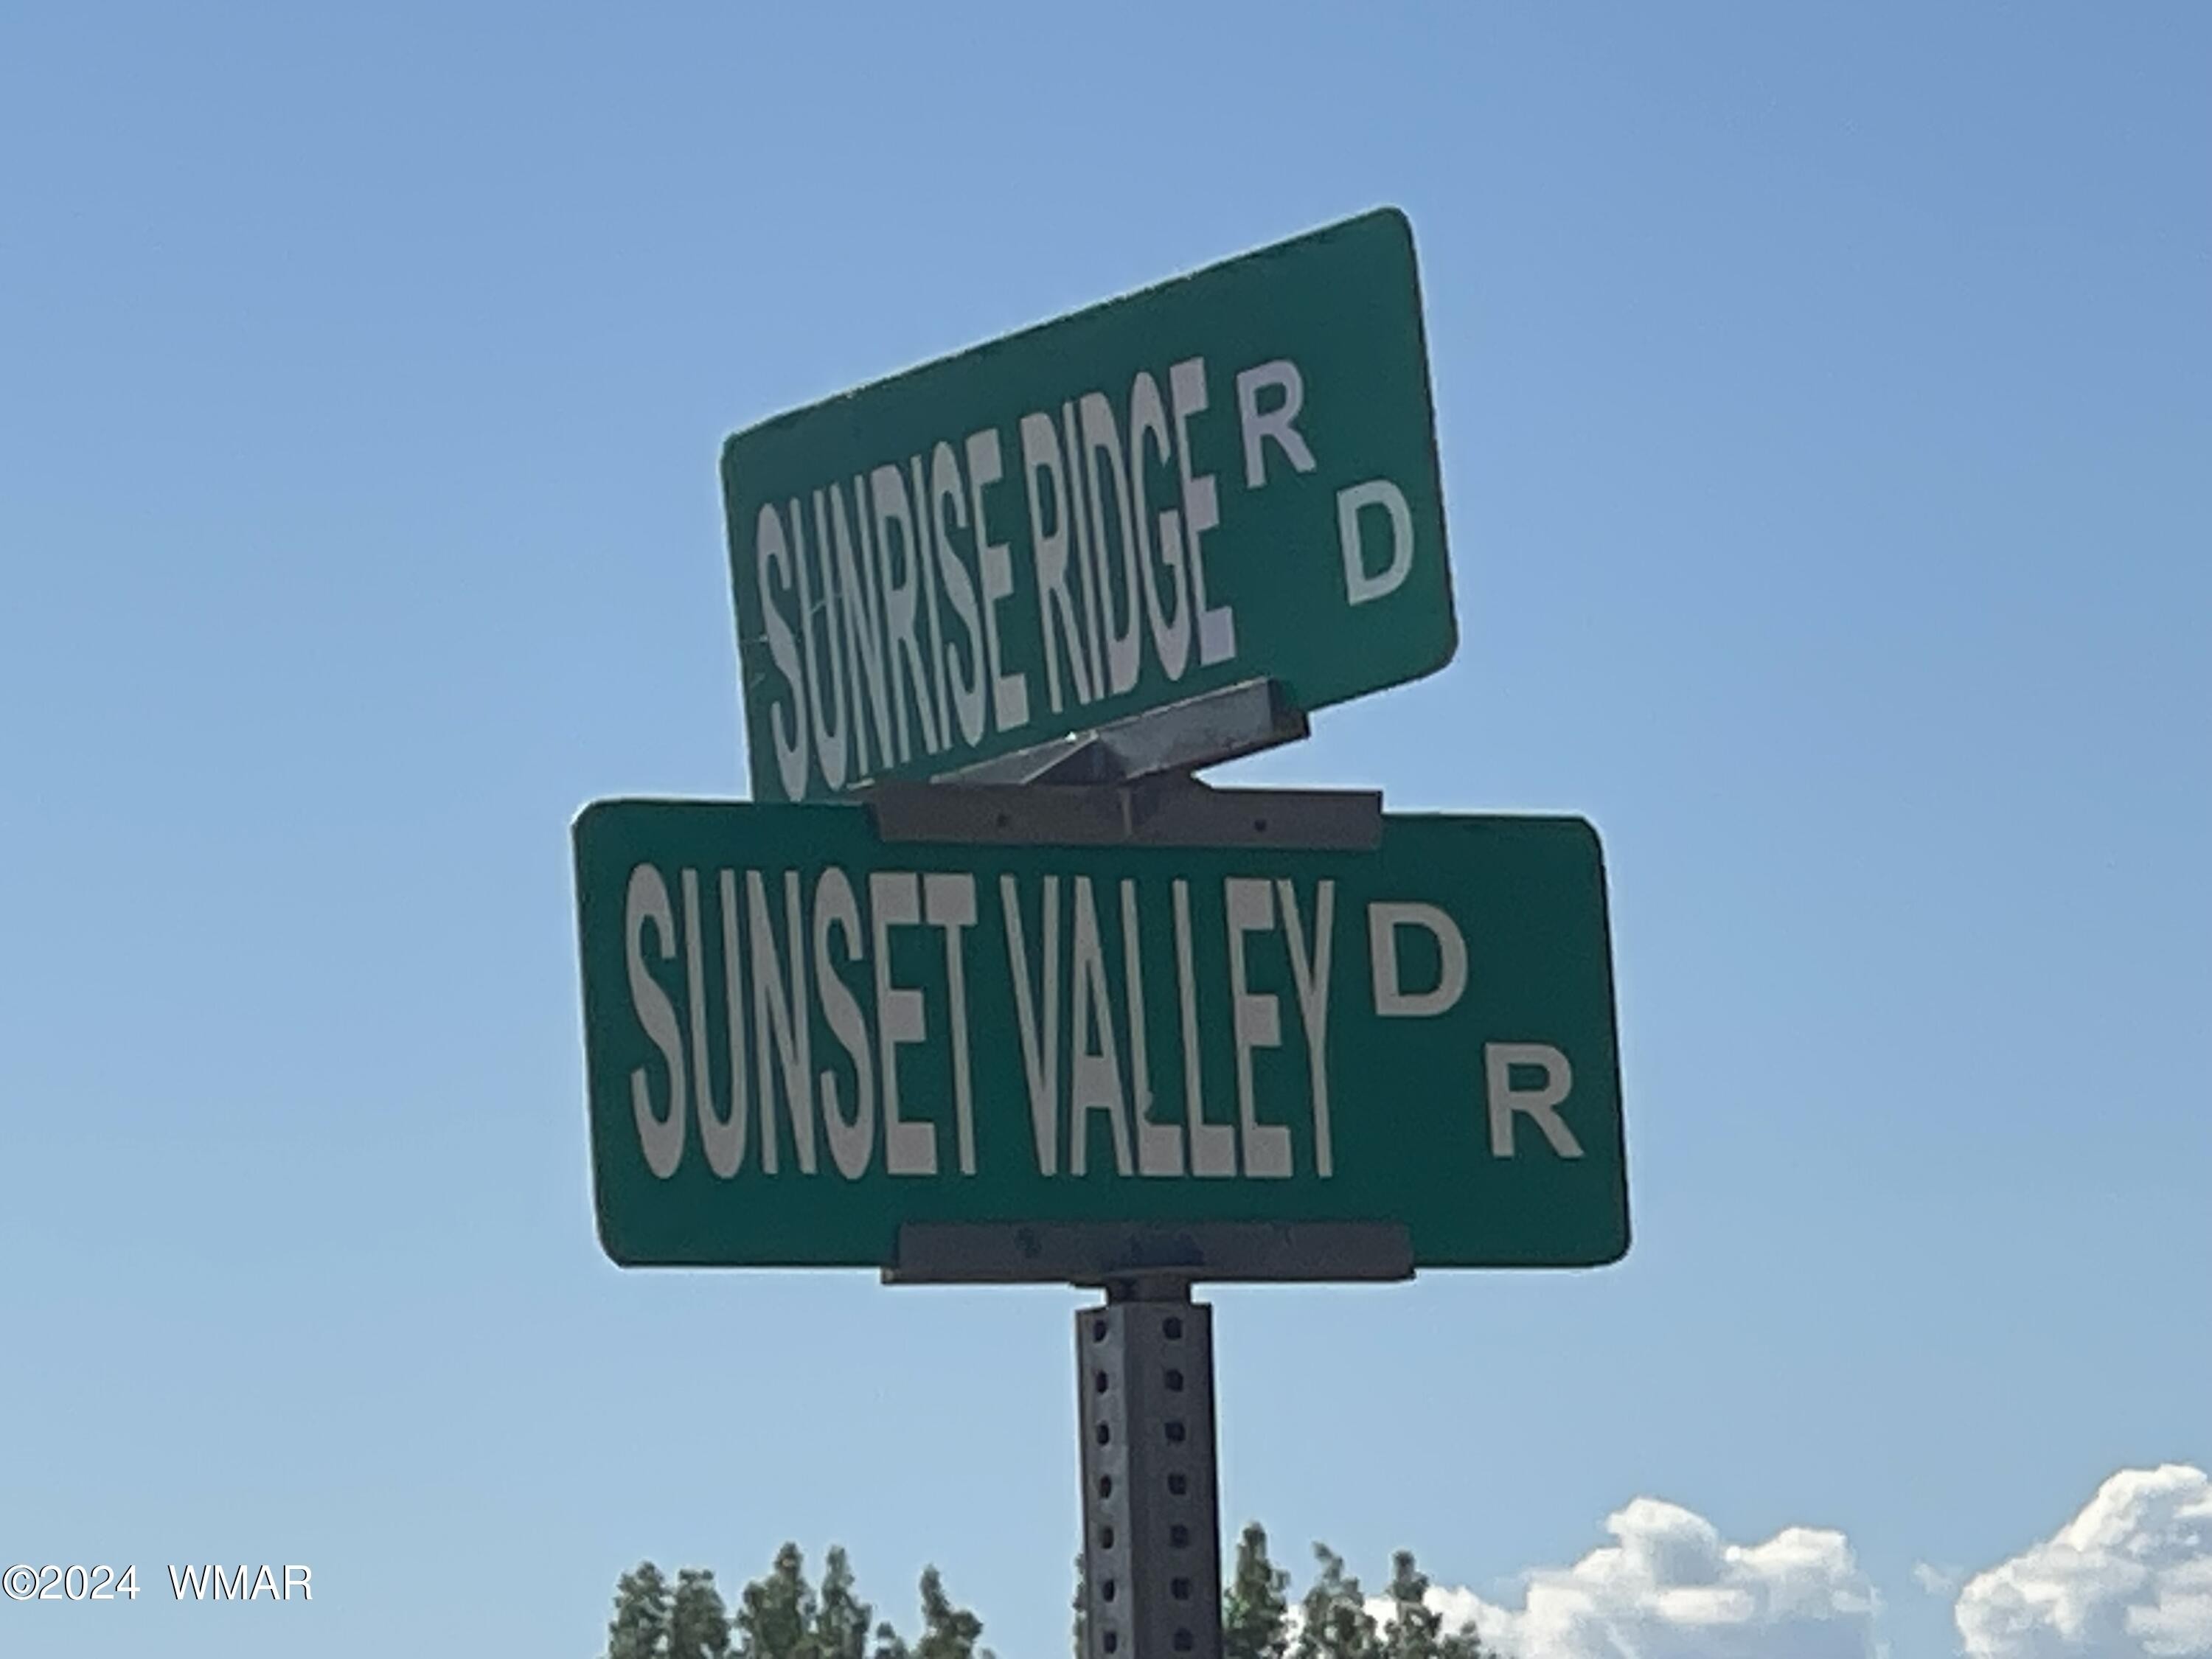 2. 0 Sunset Valley Drive